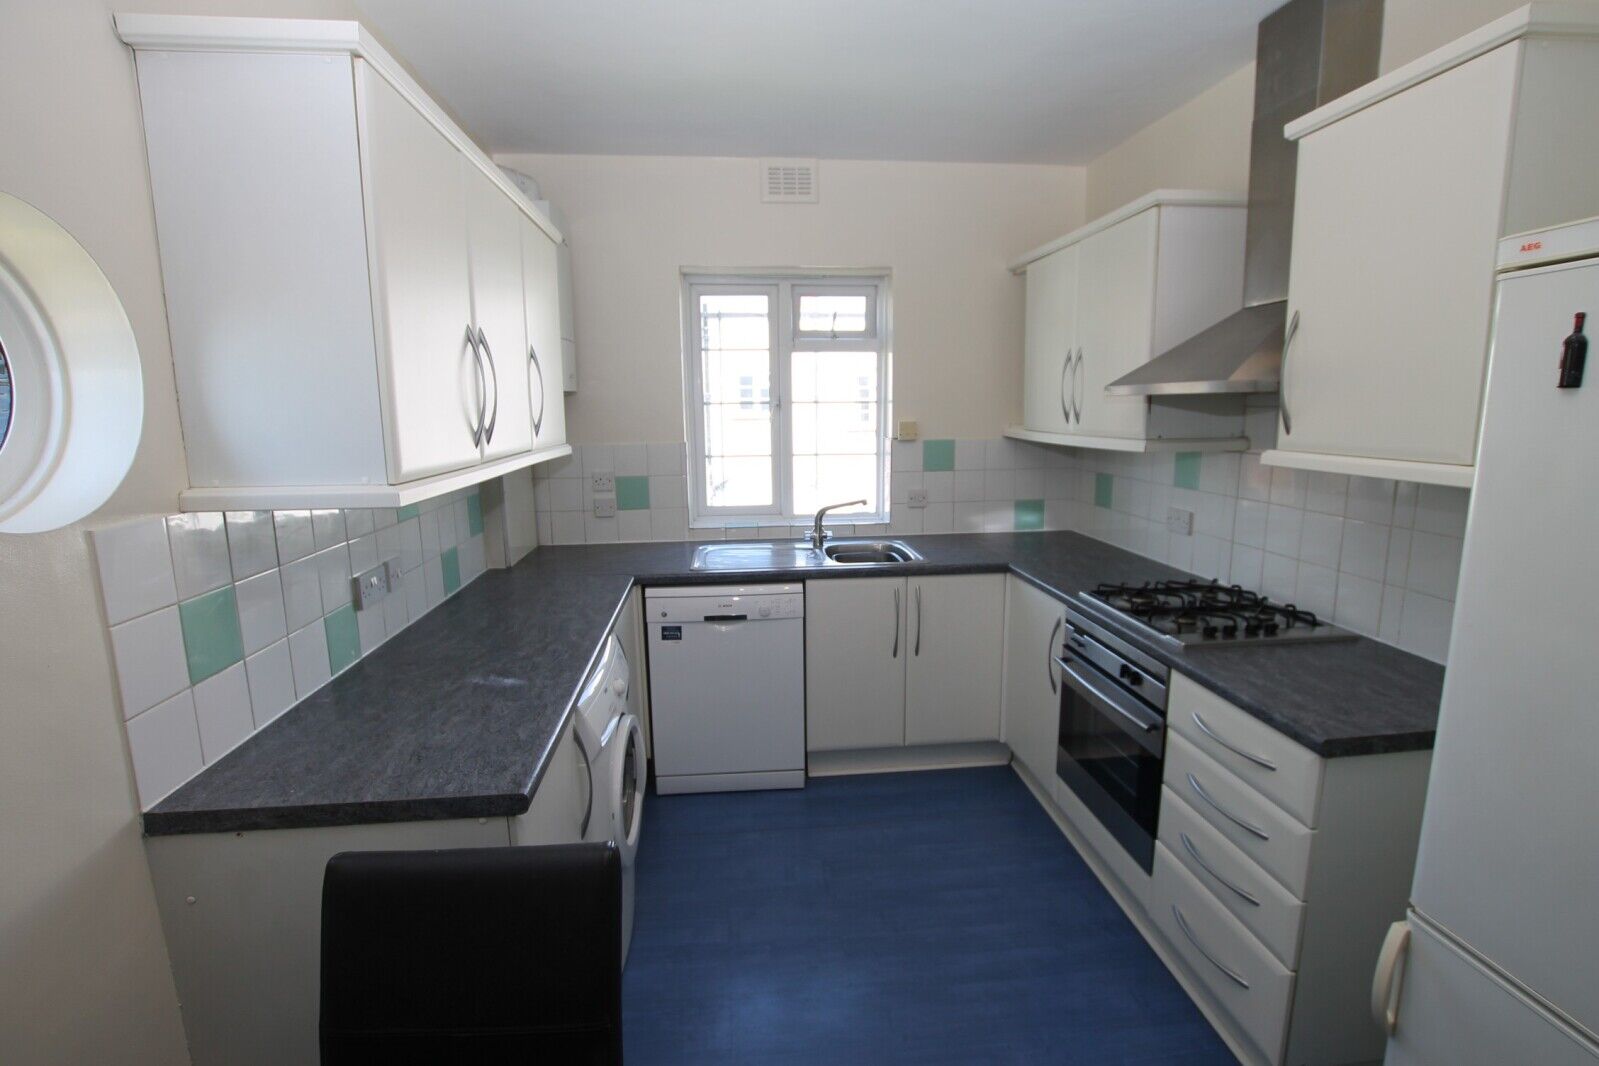 2 bedroom  flat to rent, Available from 02/05/2024 Merton Mansions, Bushey Road, SW20, main image